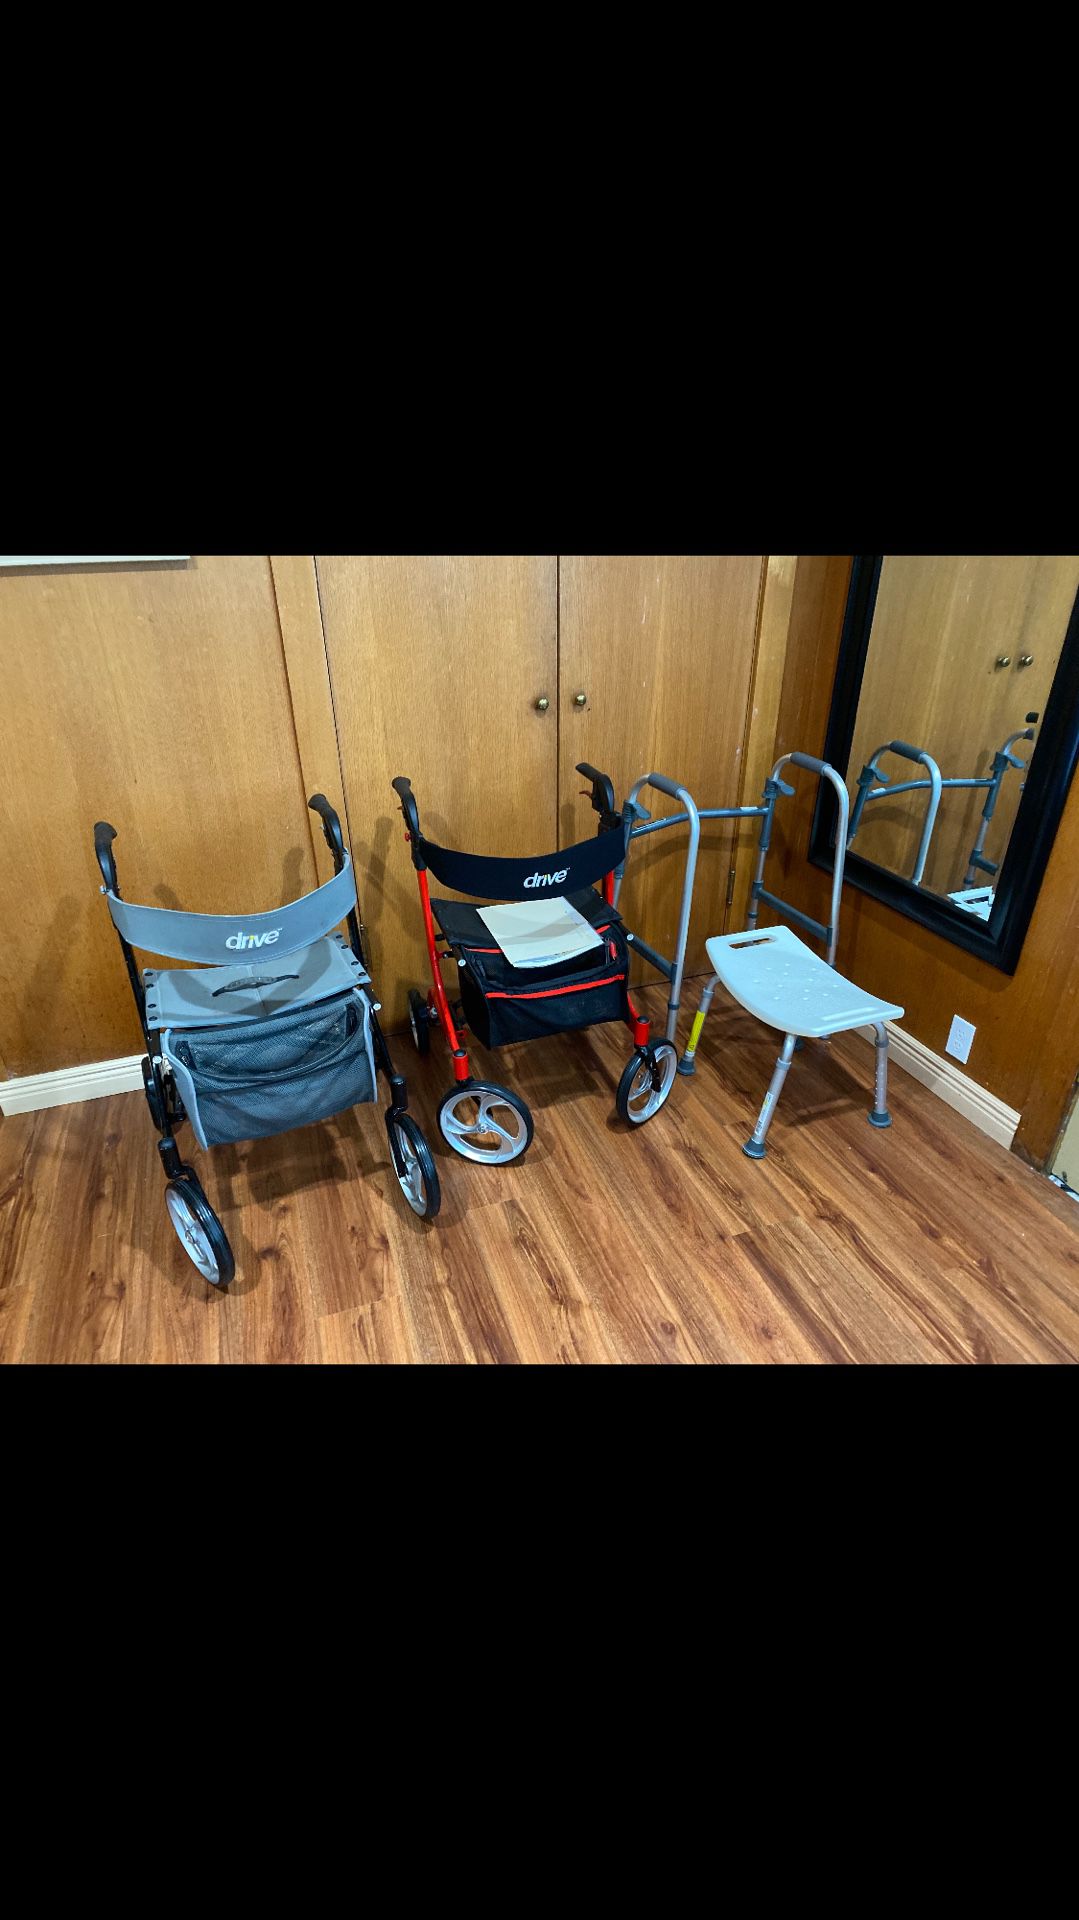 Free To A Good Home Medical Commodes shower Chairs Walkers Free